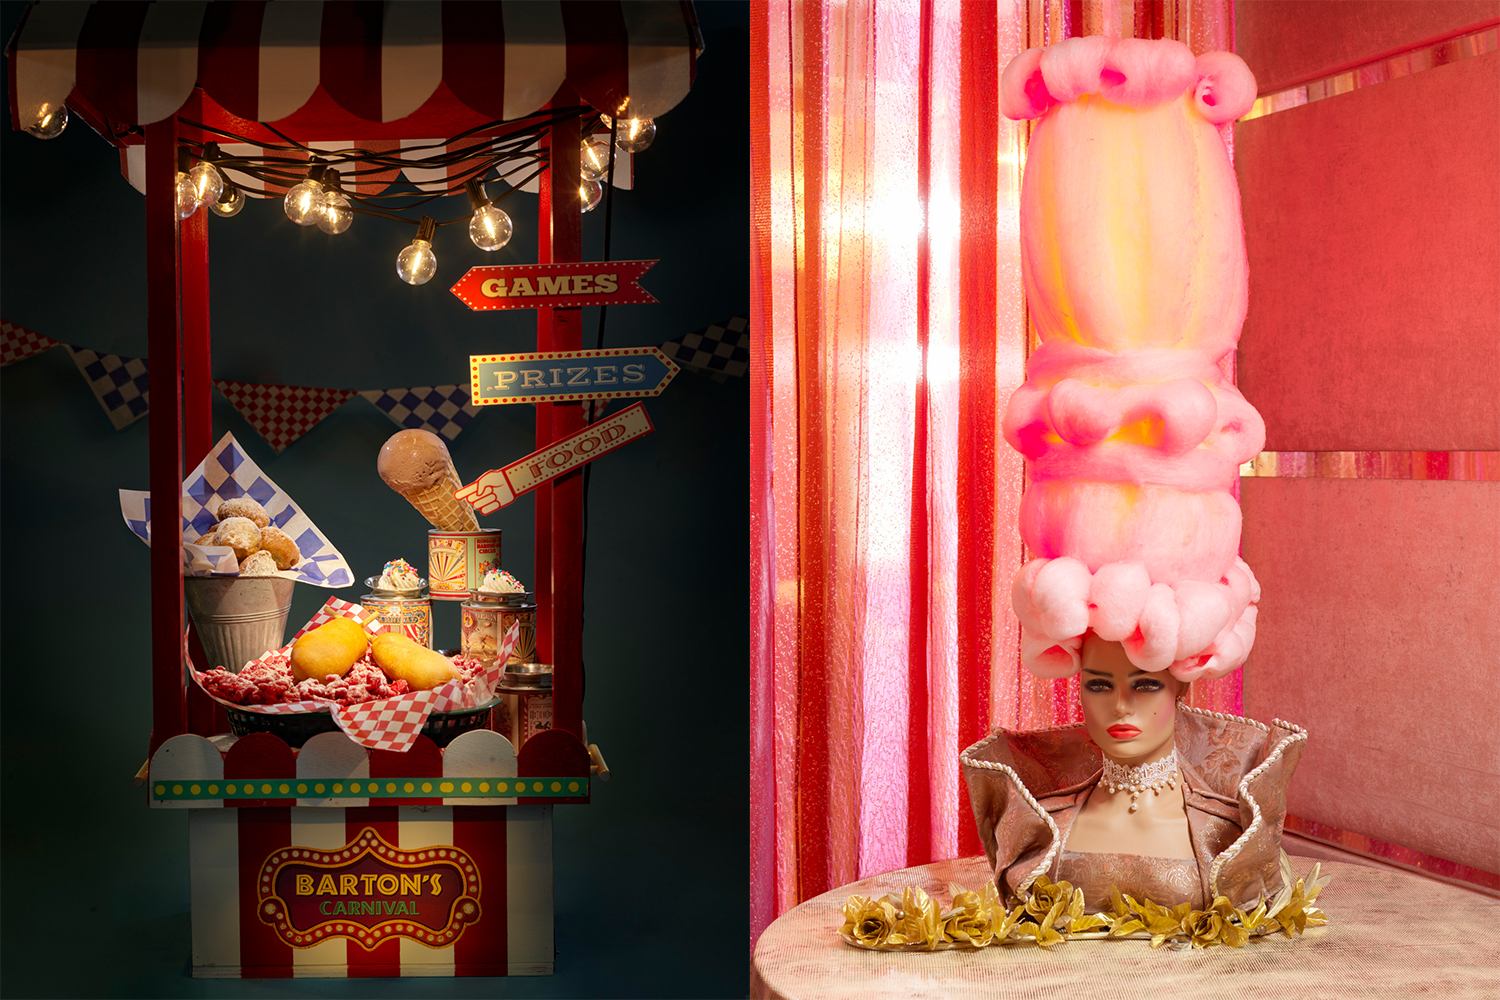 Barton's Vintage Carnival (left) and Marie Antoinette, both desserts at the Barton G restaurant. Yes, that's cotton candy.